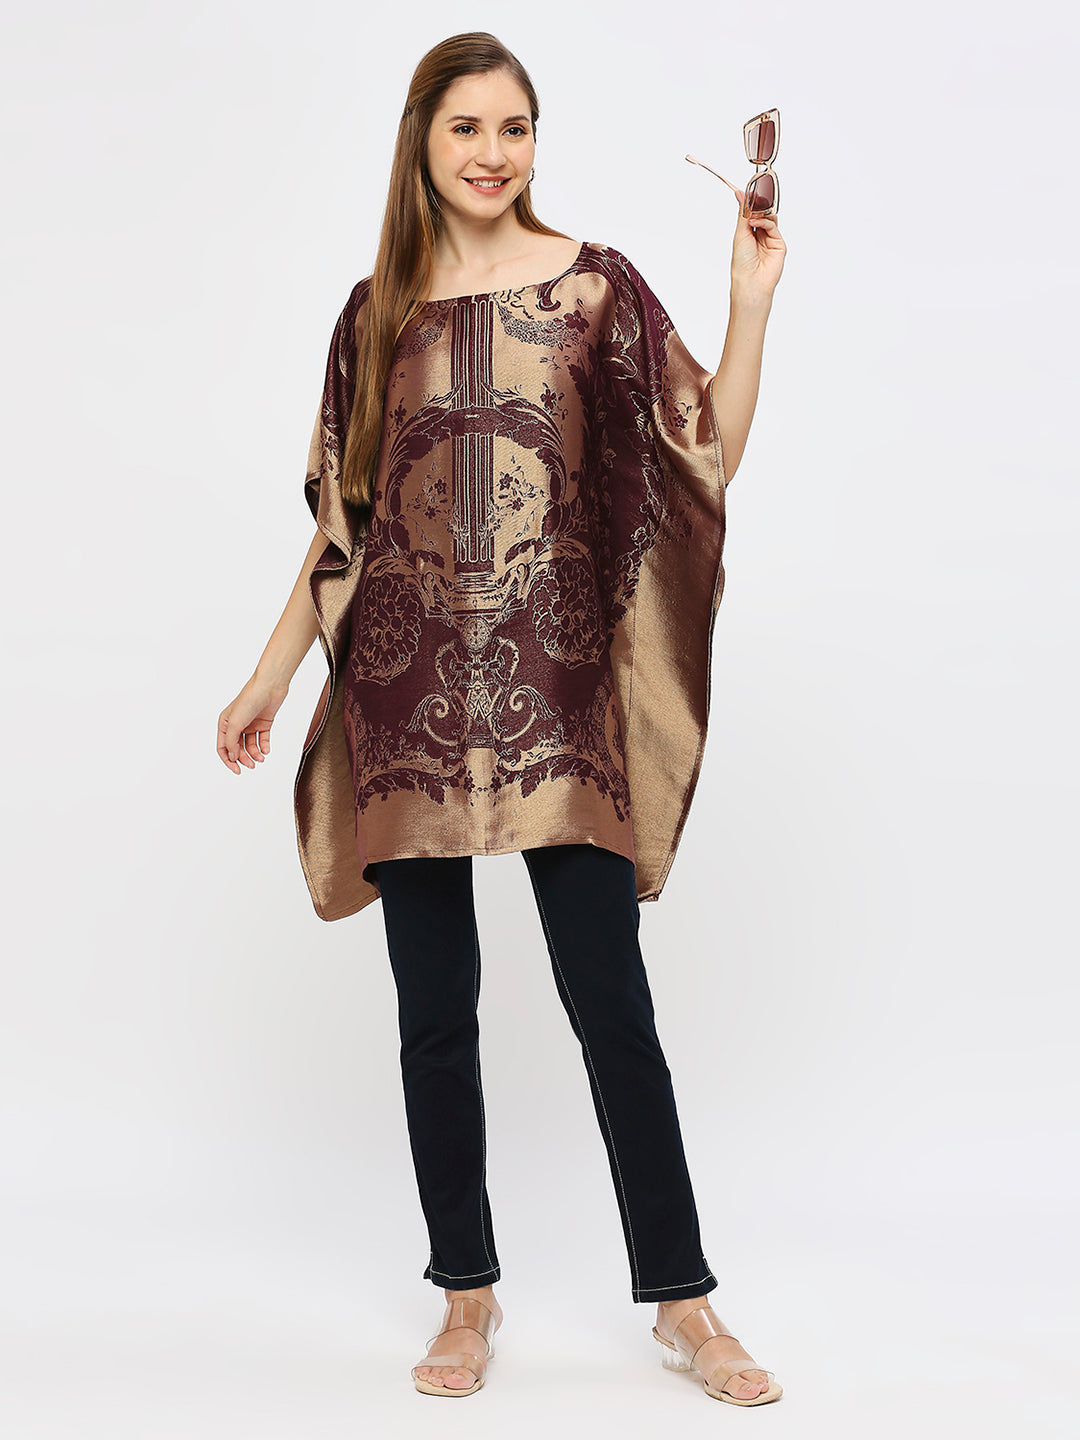 Brocade French Patterned Designed Wine Poncho